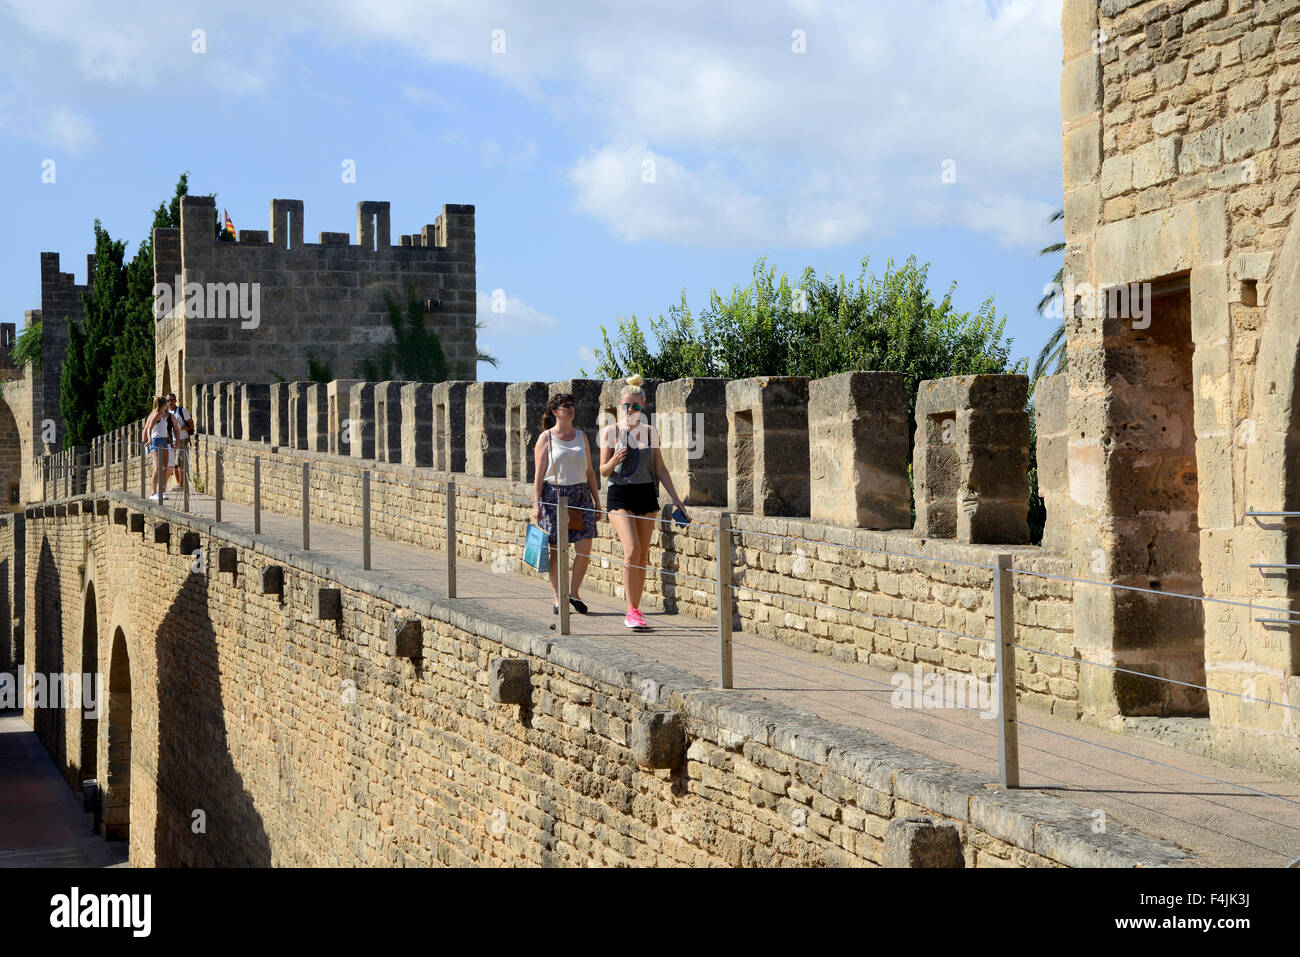 Tourists on the battlements of the ancient city wall, Alcudia Old Town, Balearic Islands, Majorca, Mallorca, Spain Stock Photo